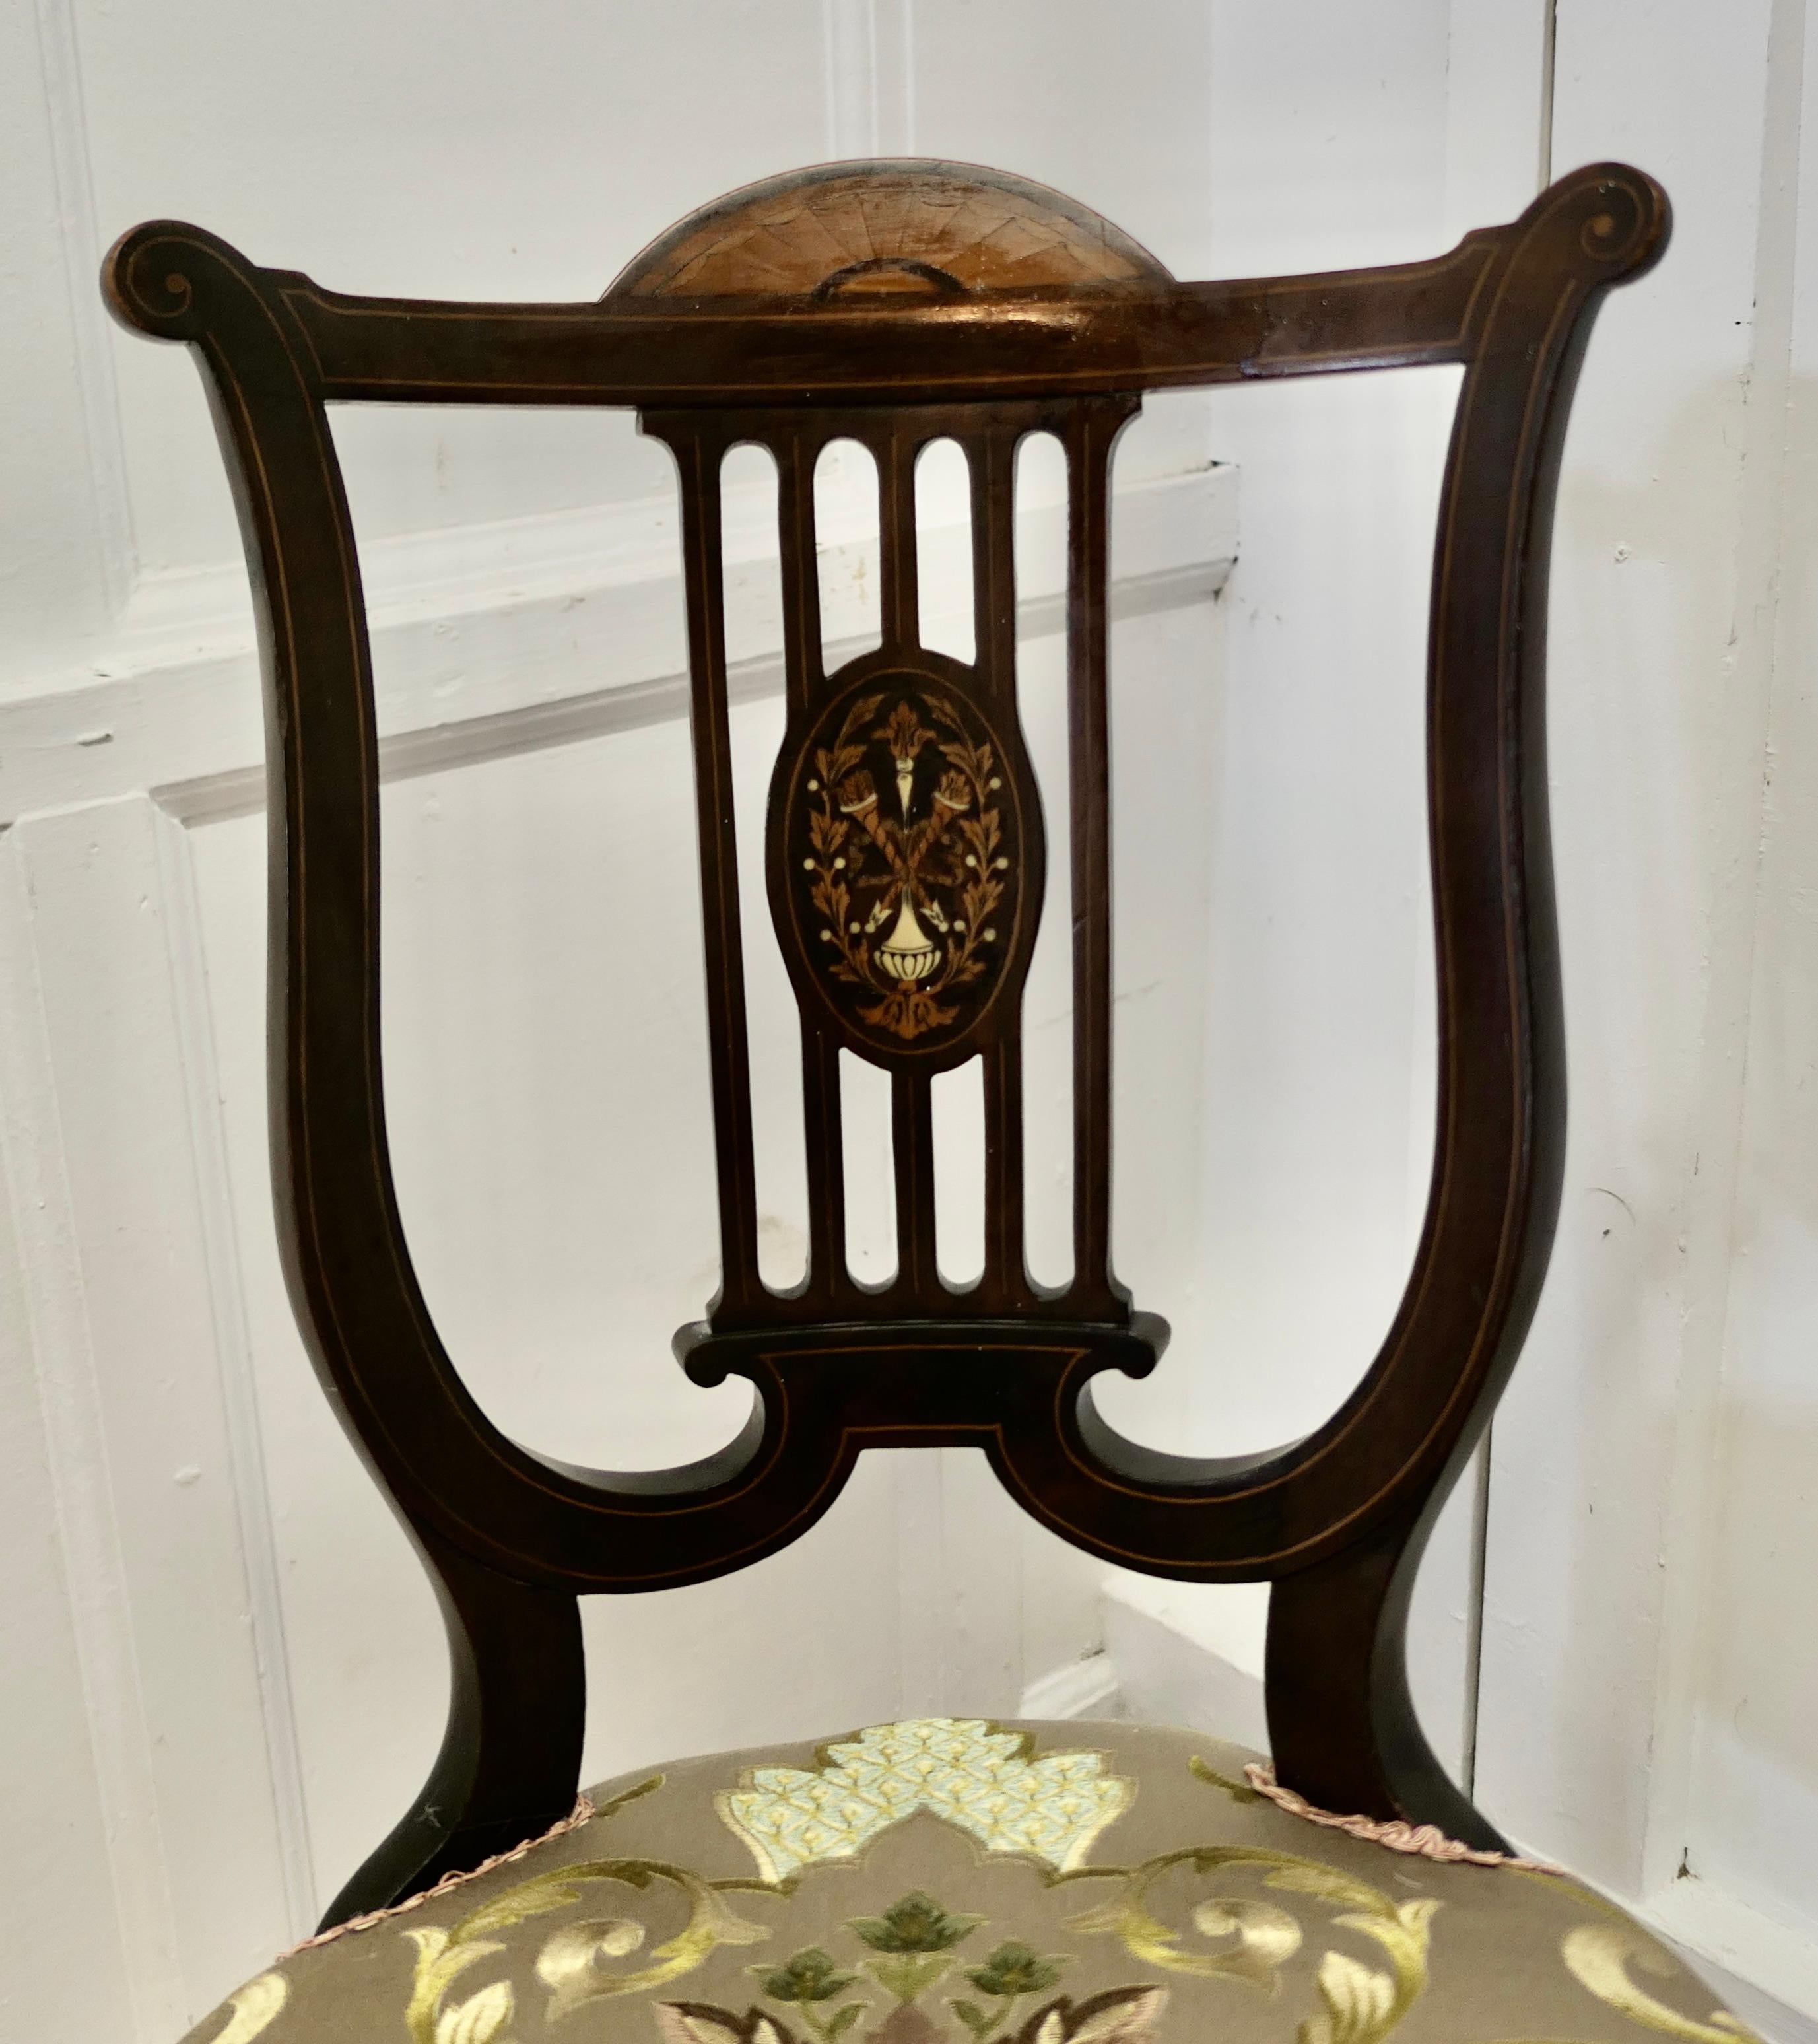 Superb Quality Lyre Back Revolving Harpist/Cello Music Chair

This is a really lovely fine quality Lyre back chair, the back has a very fine decorative cartouche and the seat has been upholstered with silk brocade 
The chair revolves, raising the